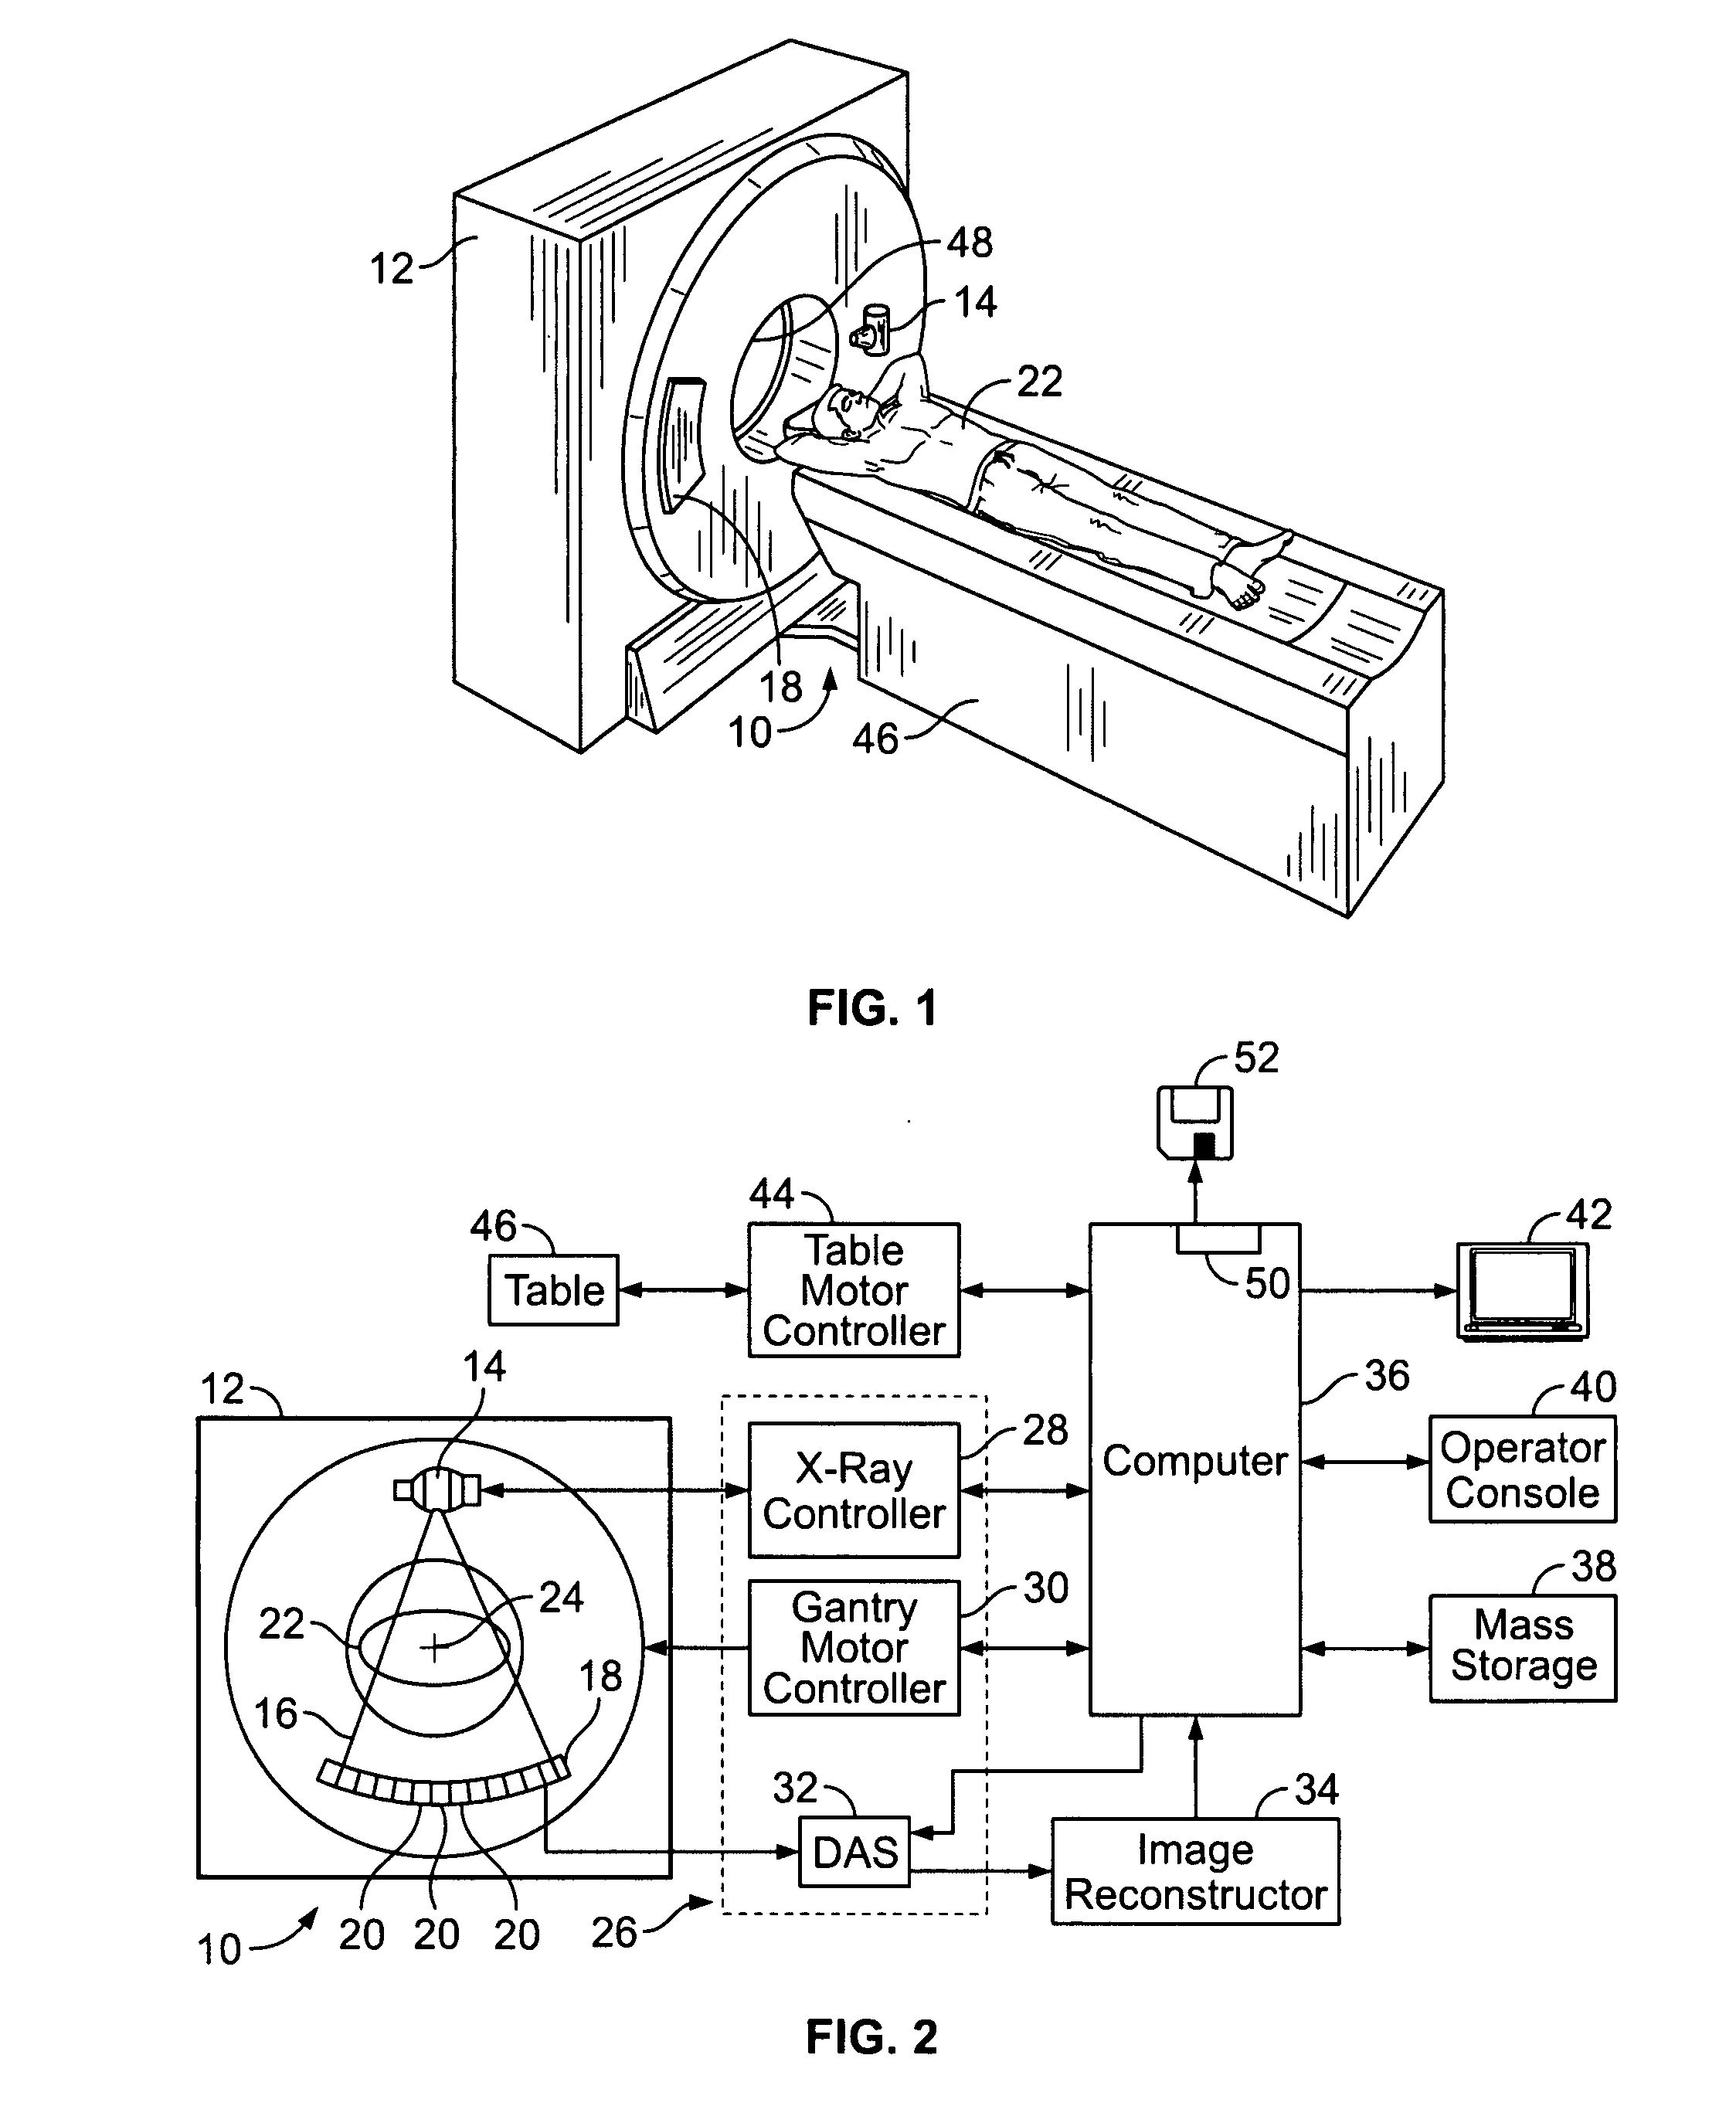 Method and system for performing high temporal resolution bolus detection using CT image projection data